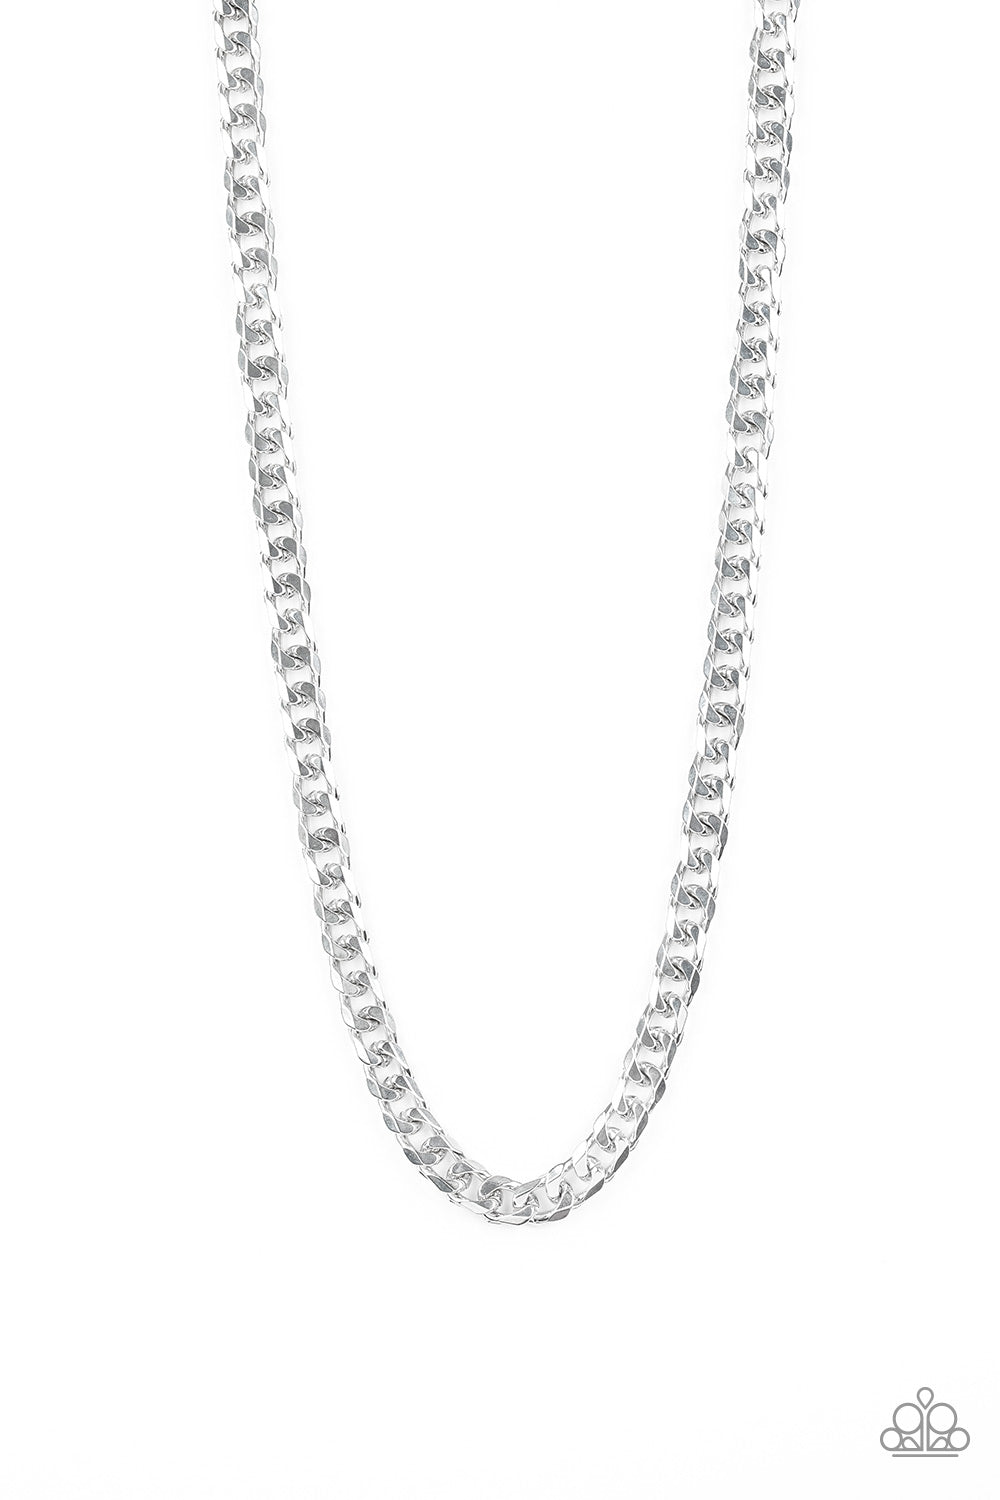 The Game CHAIN-ger Silver Necklace - TheMasterCollection